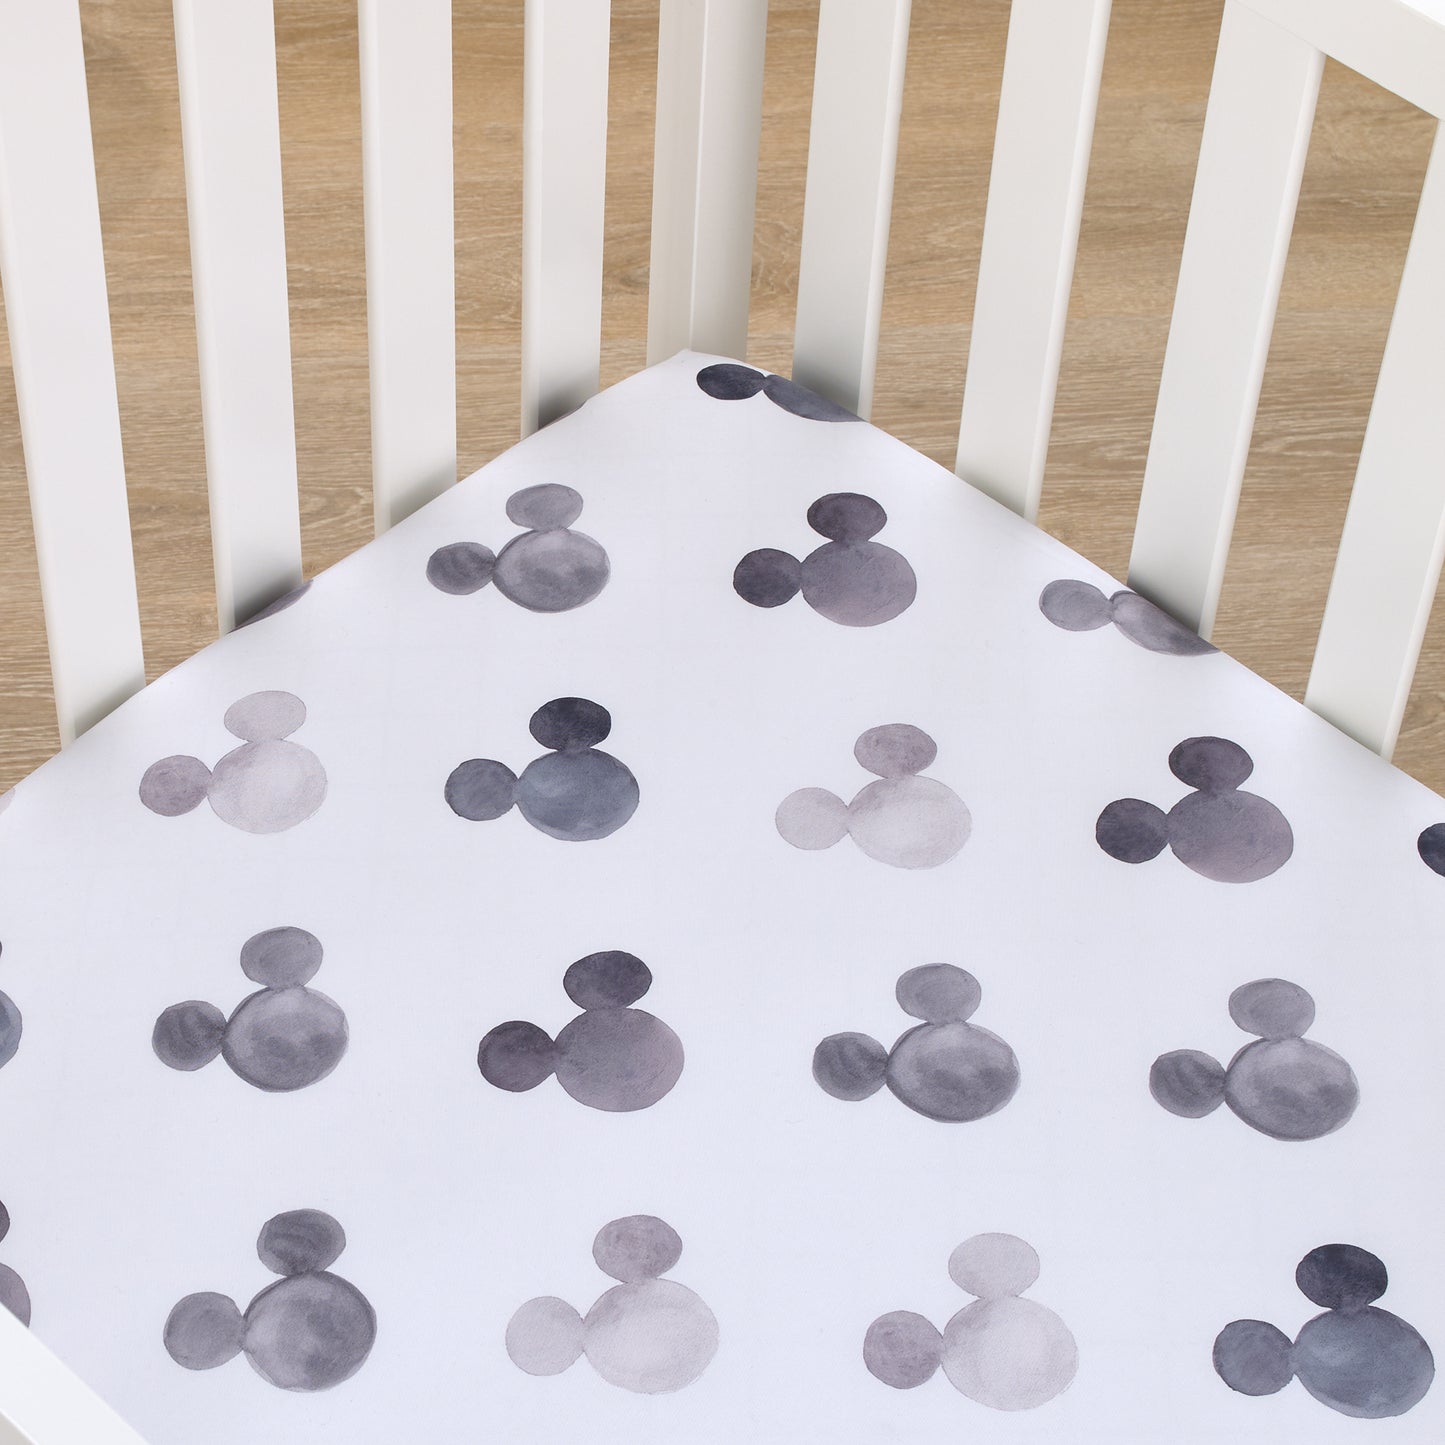 Disney Mickey Mouse - Black, White and Gray Watercolor Mickey Ears Nursery Fitted Mini Crib Sheet